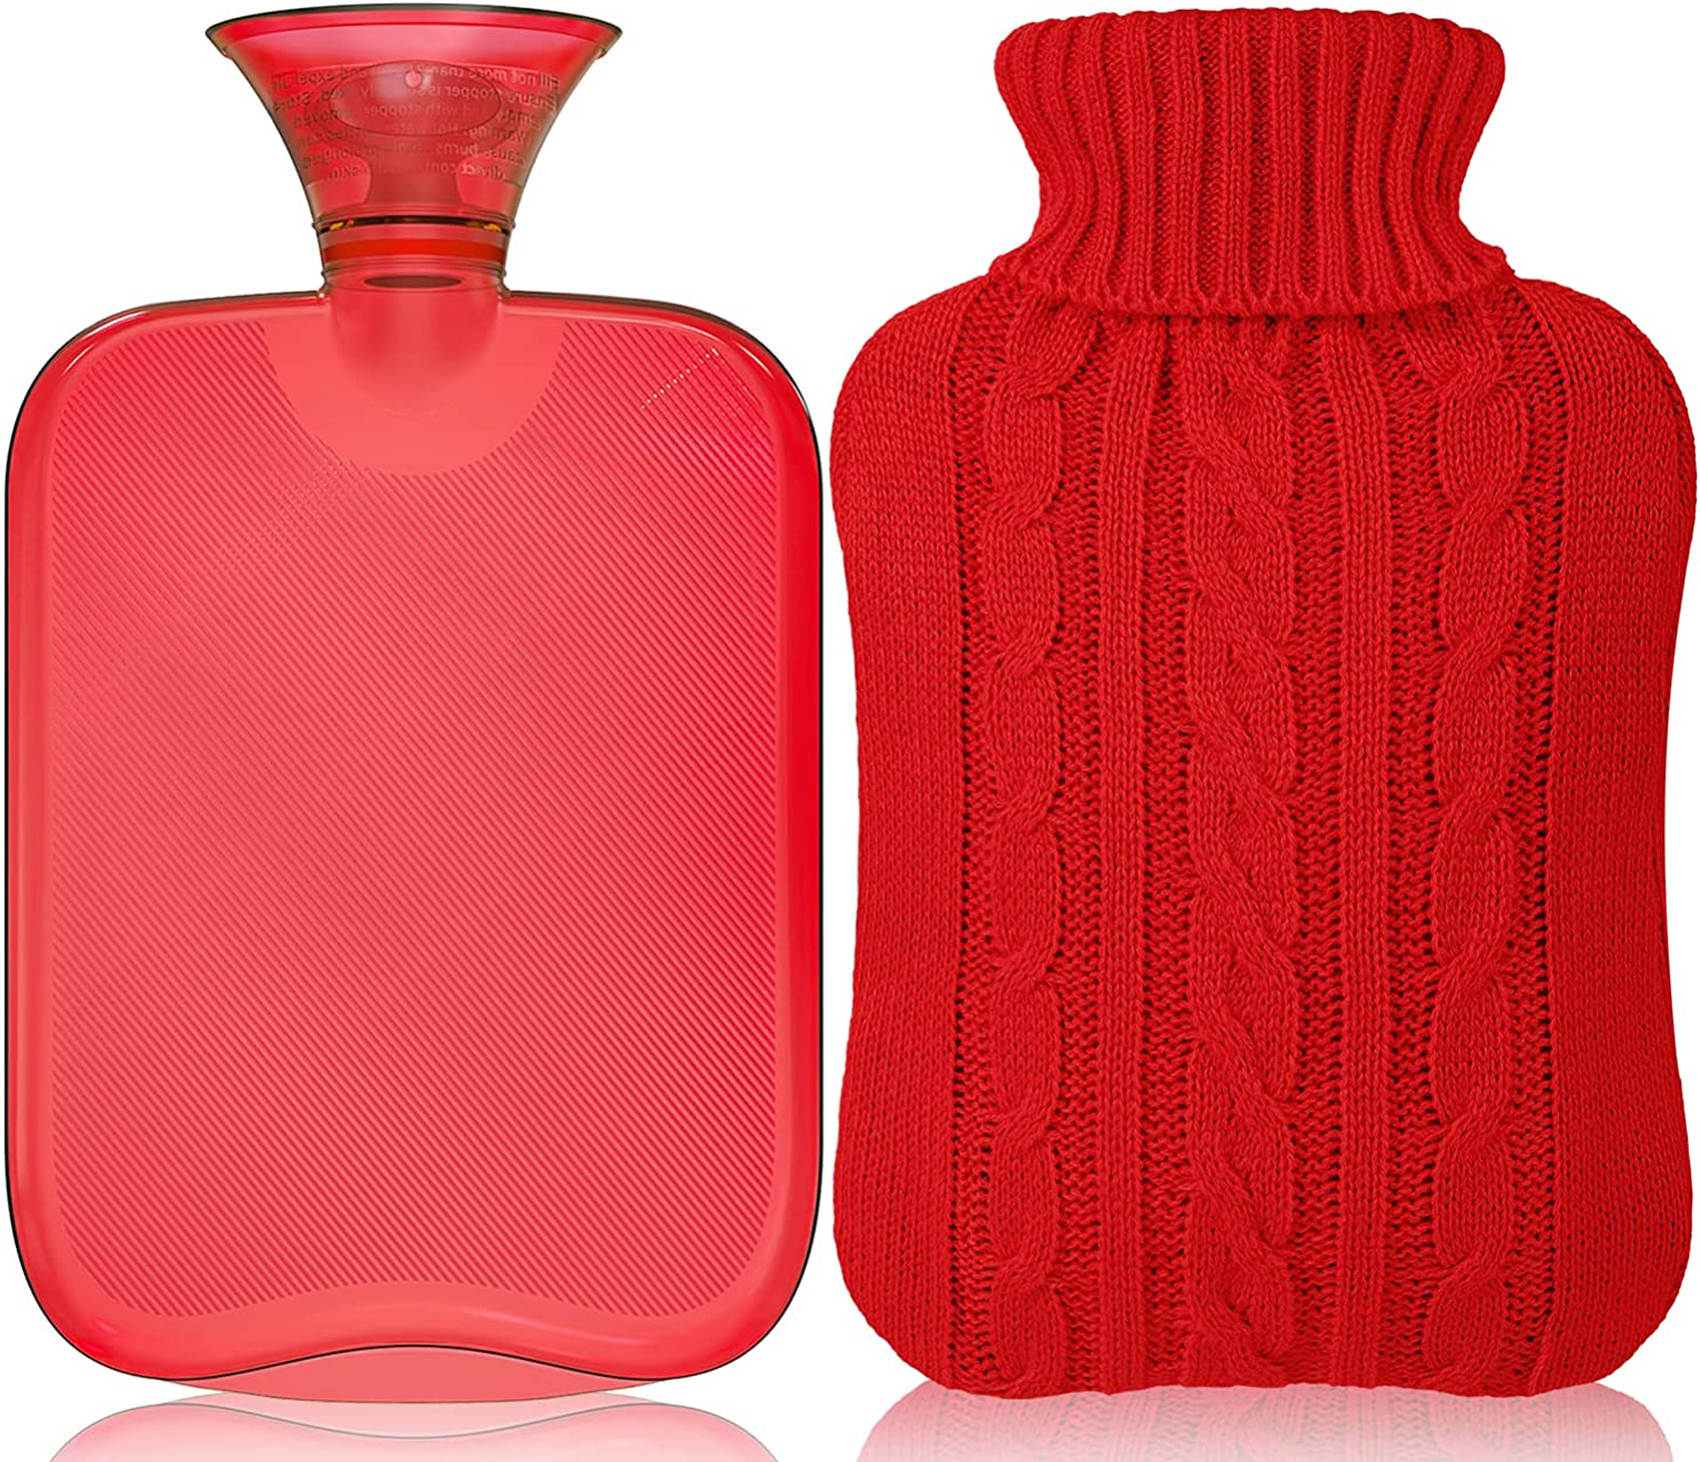 Attmu Hot Water Bottle with Cover Knitted, Transparent Hot Water Bag 2 Liter - Red